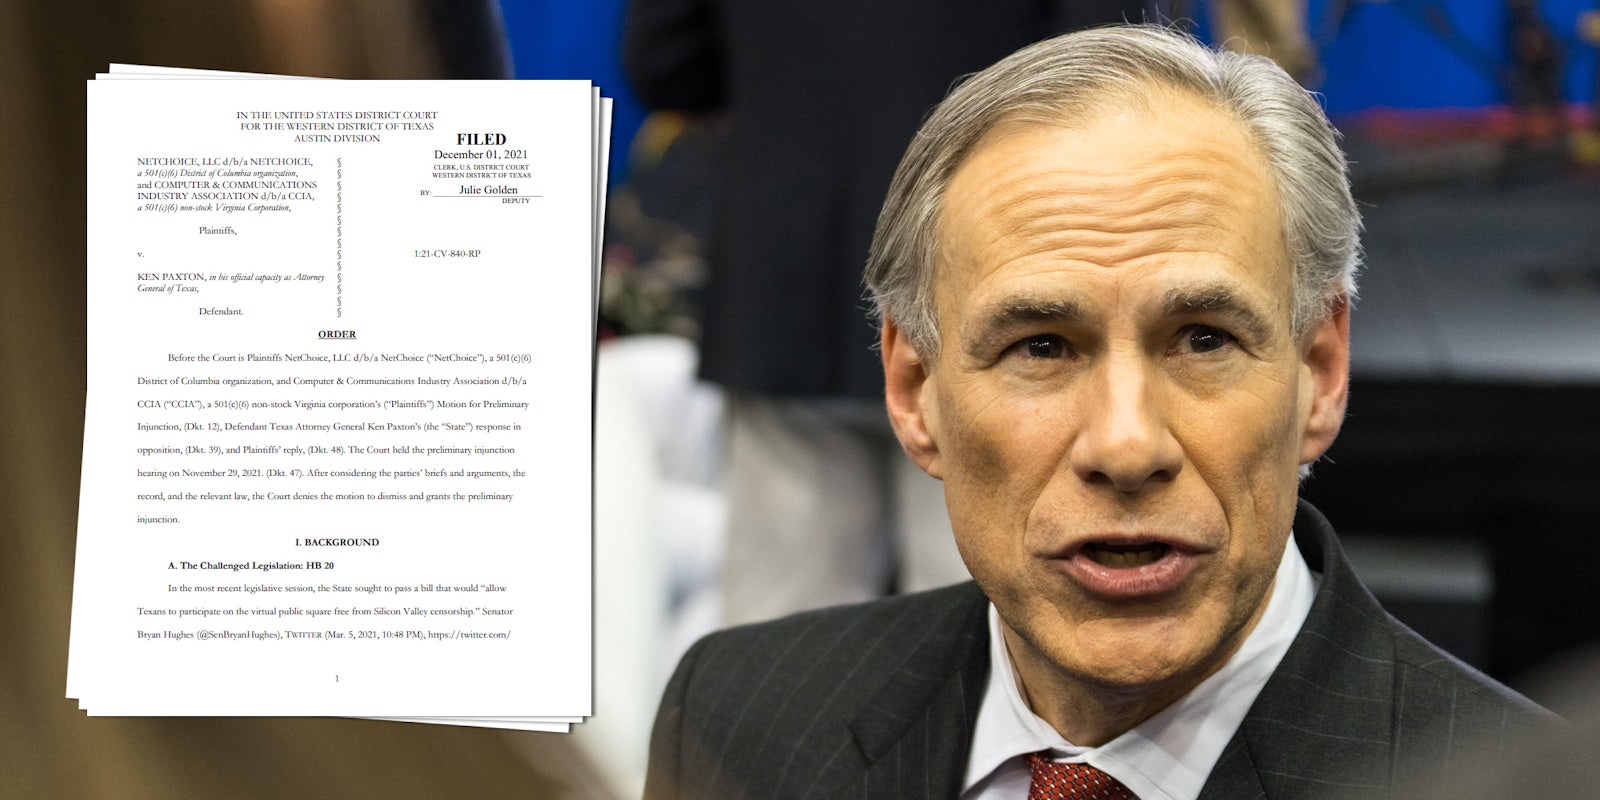 Texas Gov. Greg Abbott next to a judge's order that blocked the state's controversial social media law.